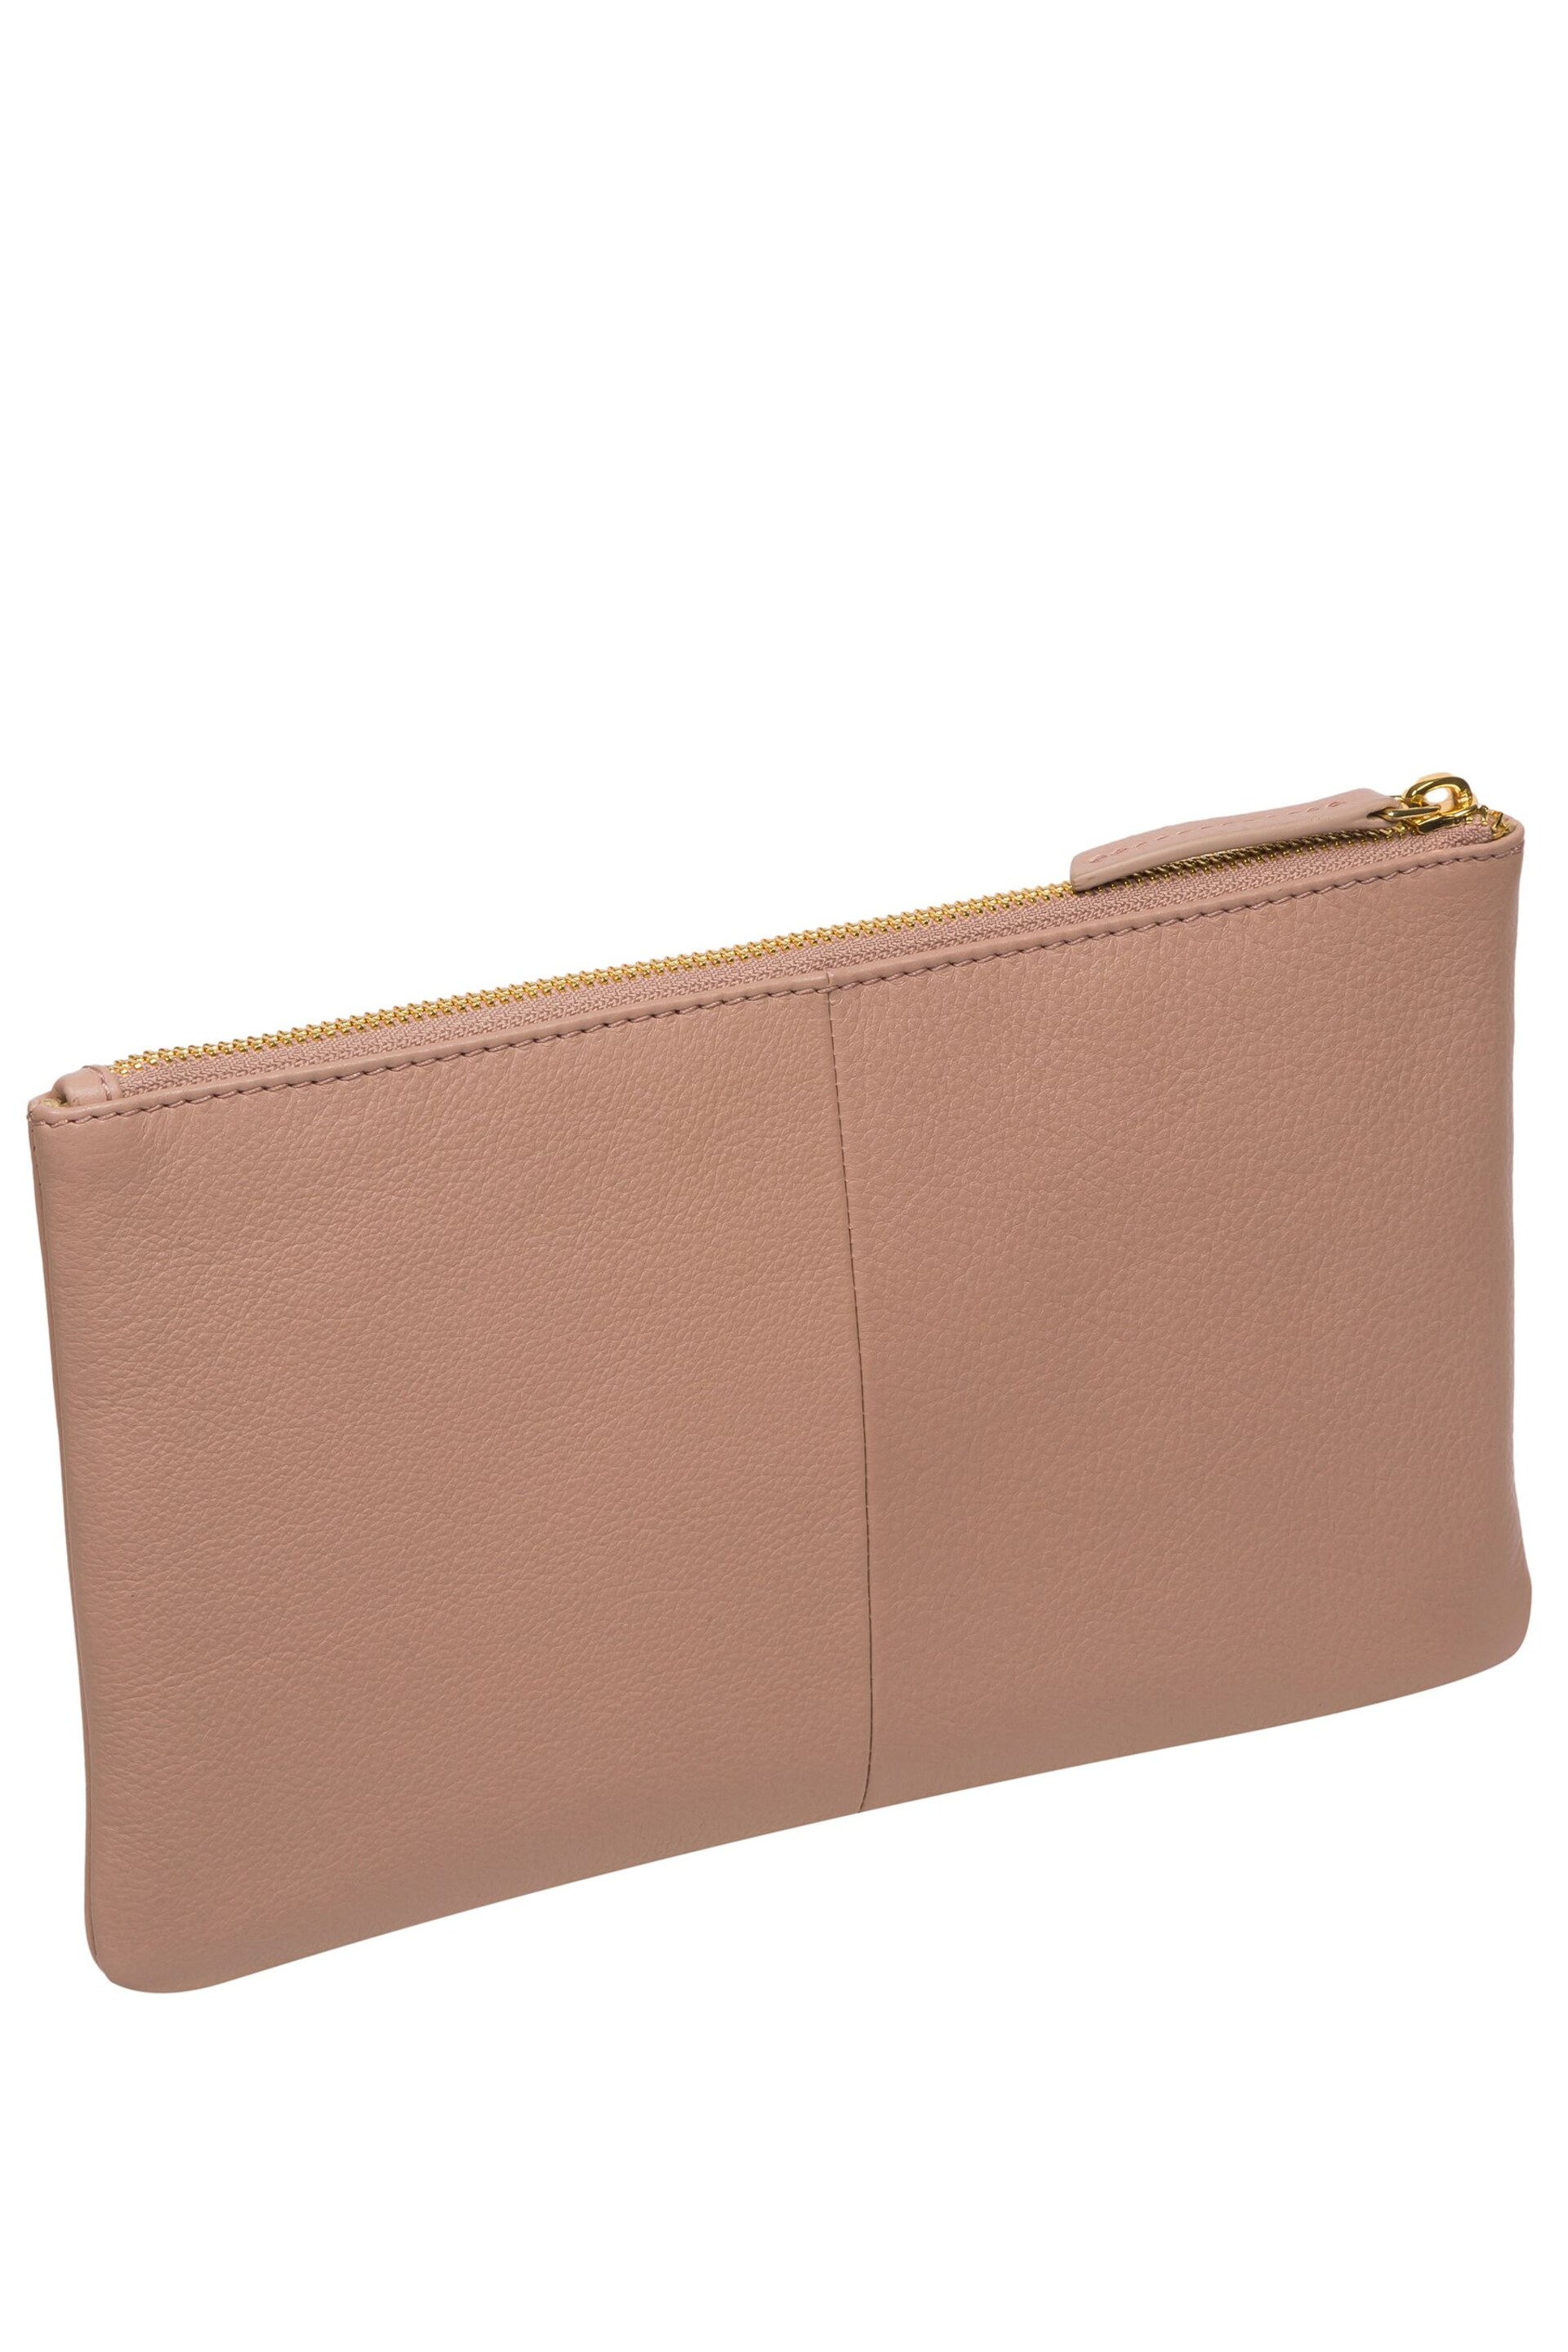 Pure Luxuries London Wilmslow Nappa Leather Clutch Bag - Image 3 of 6